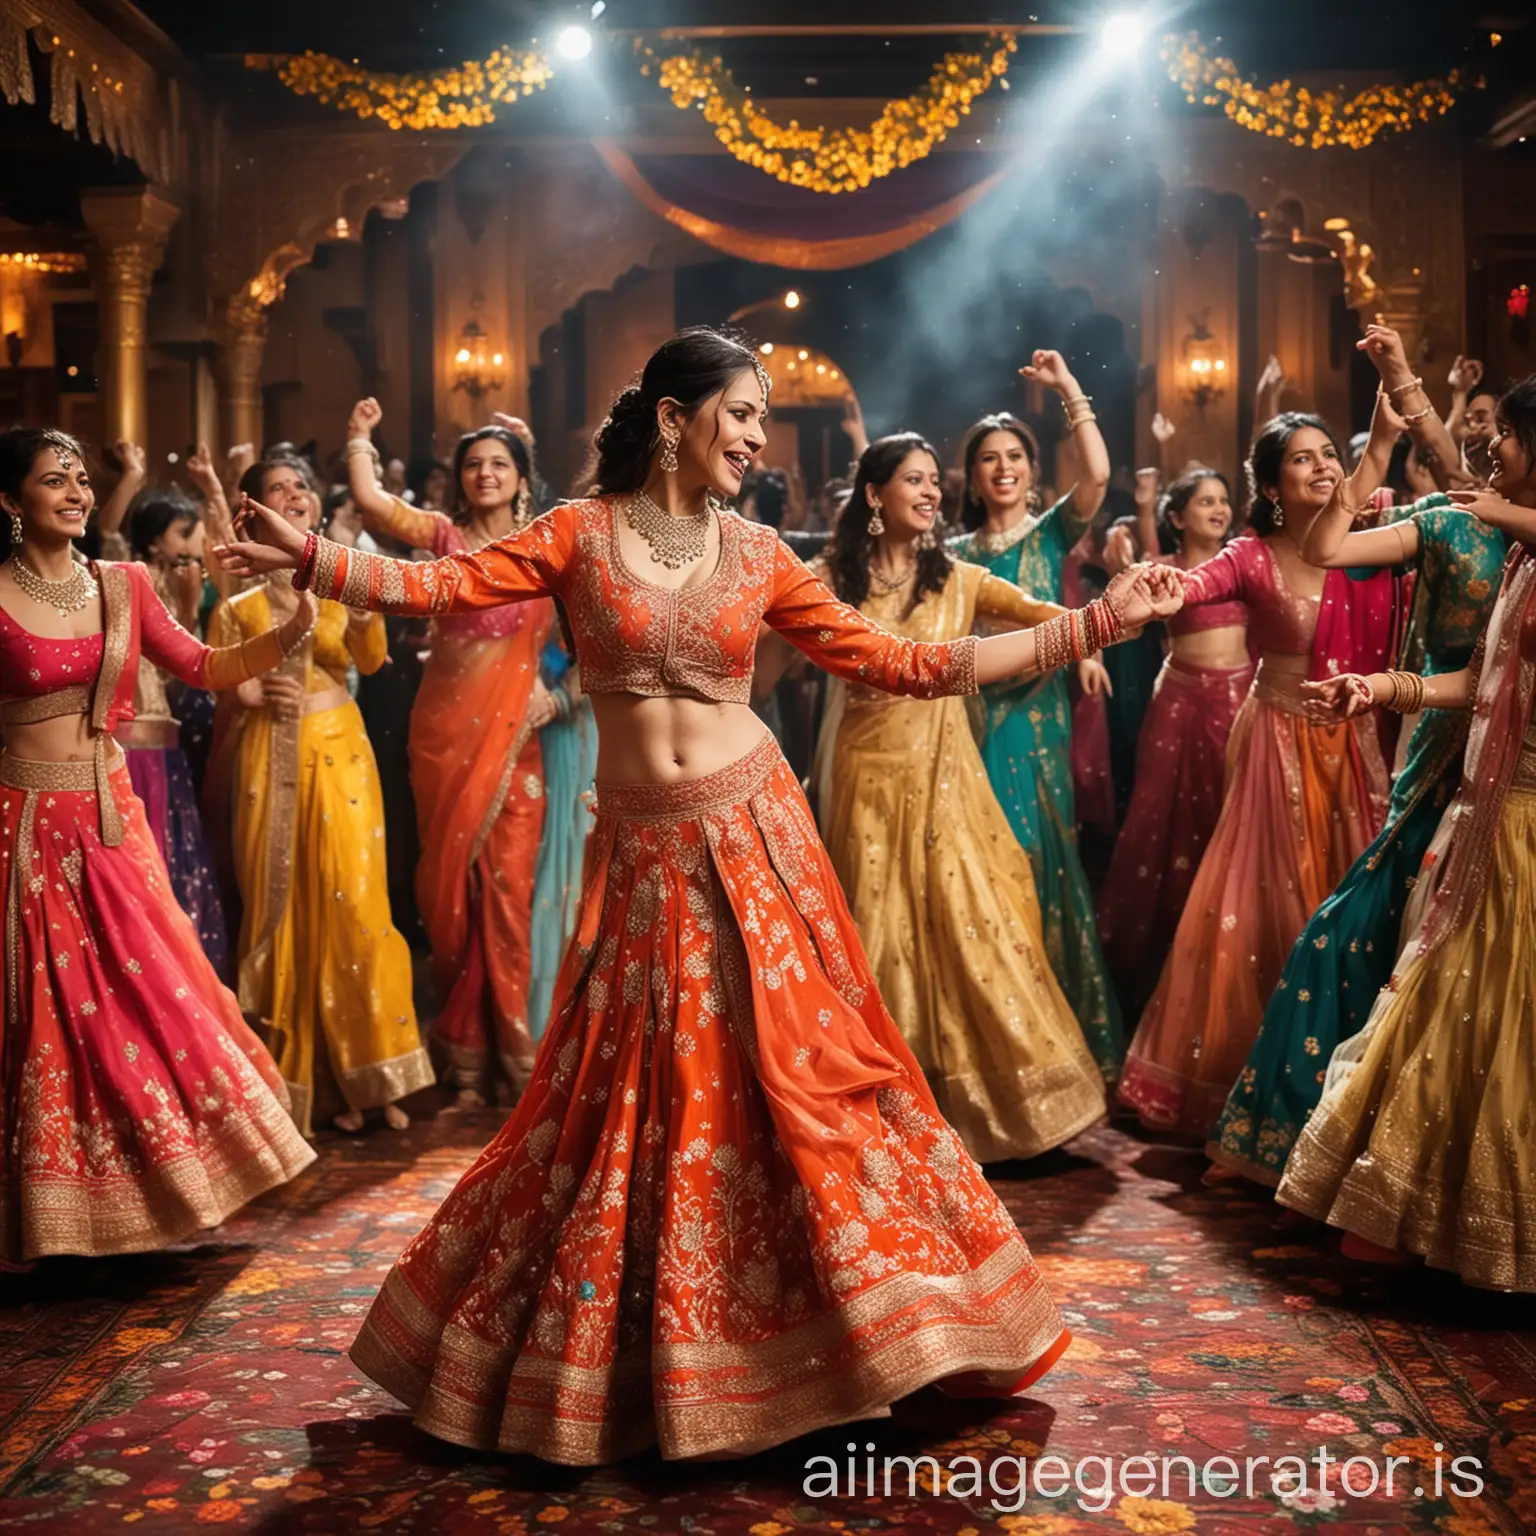 Create a vibrant and detailed image of families dancing at a Bollywood-themed party. The setting is an extravagant, colorful venue filled with traditional Indian elements like hanging marigold flowers, fairy lights, and ornate drapes. The atmosphere is lively and joyous, capturing the essence of Bollywood glamour. In the center of the scene, a large dance floor is packed with families dancing energetically to Bollywood music. Men are dressed in stylish sherwanis, kurta pajamas, and Nehru jackets, while women wear elegant sarees, lehengas, and anarkalis, adorned with intricate embroidery and sparkling jewelry. Children are in miniature versions of traditional outfits, such as colorful lehengas and kurtas. Each family is engaged in dynamic dance poses, their faces lit with joyful expressions, showcasing the unity and excitement of dancing together. The overall image should be filled with vibrant colors, detailed traditional attire, and expressive faces, capturing the joy and excitement of families celebrating together at a Bollywood-themed party.